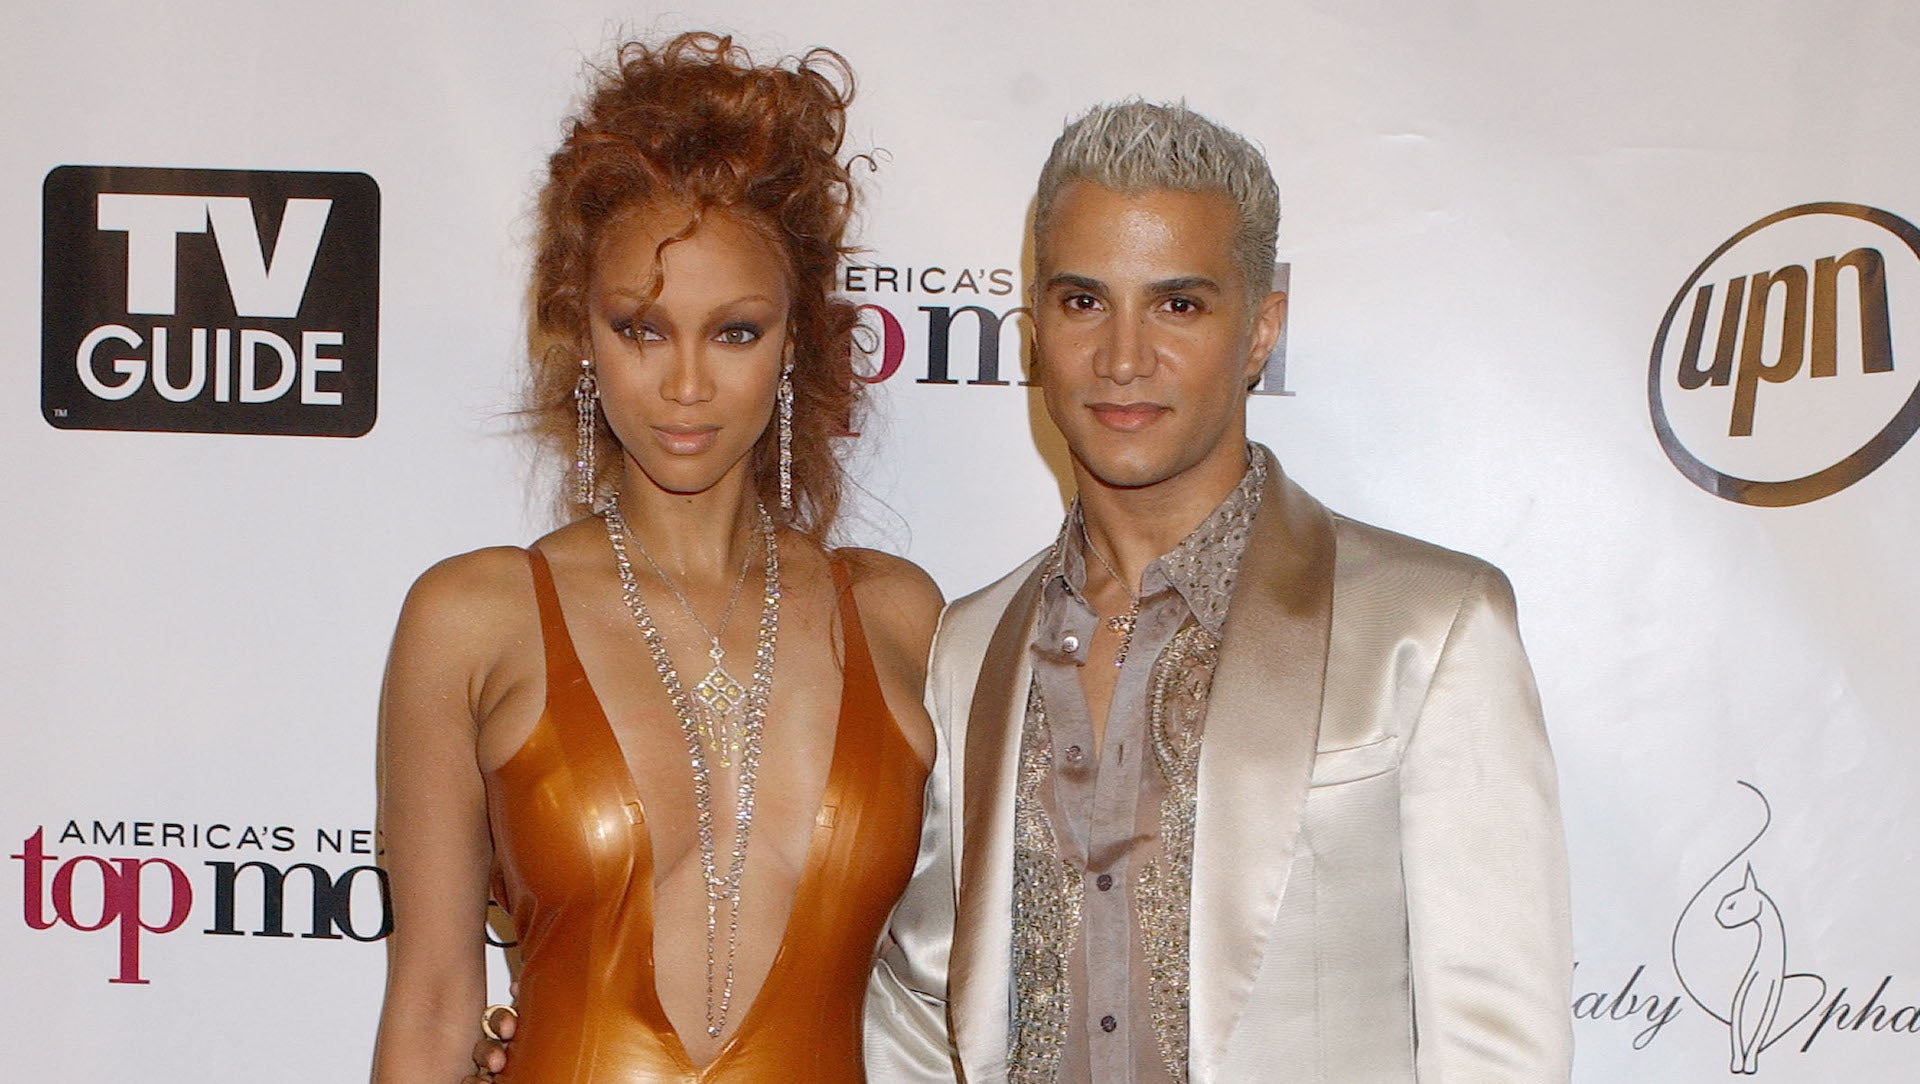 Jay Manuel Reveals 'America's Next Top Model' Ended Friendship With Tyra Banks